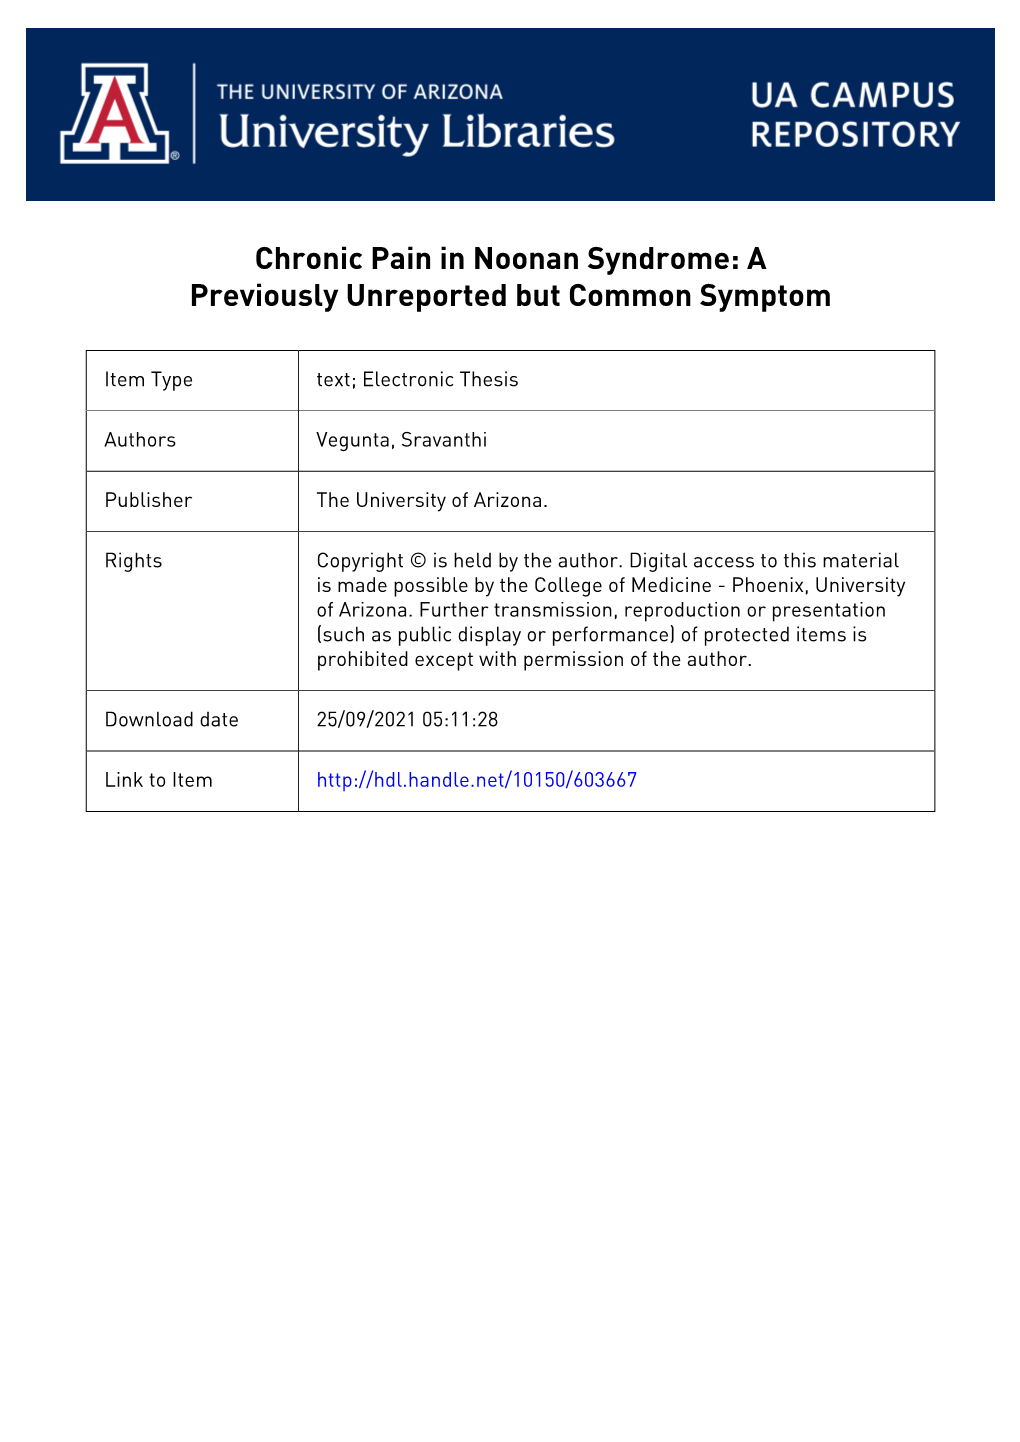 Chronic Pain in Noonan Syndrome: a Previously Unreported but Common Symptom